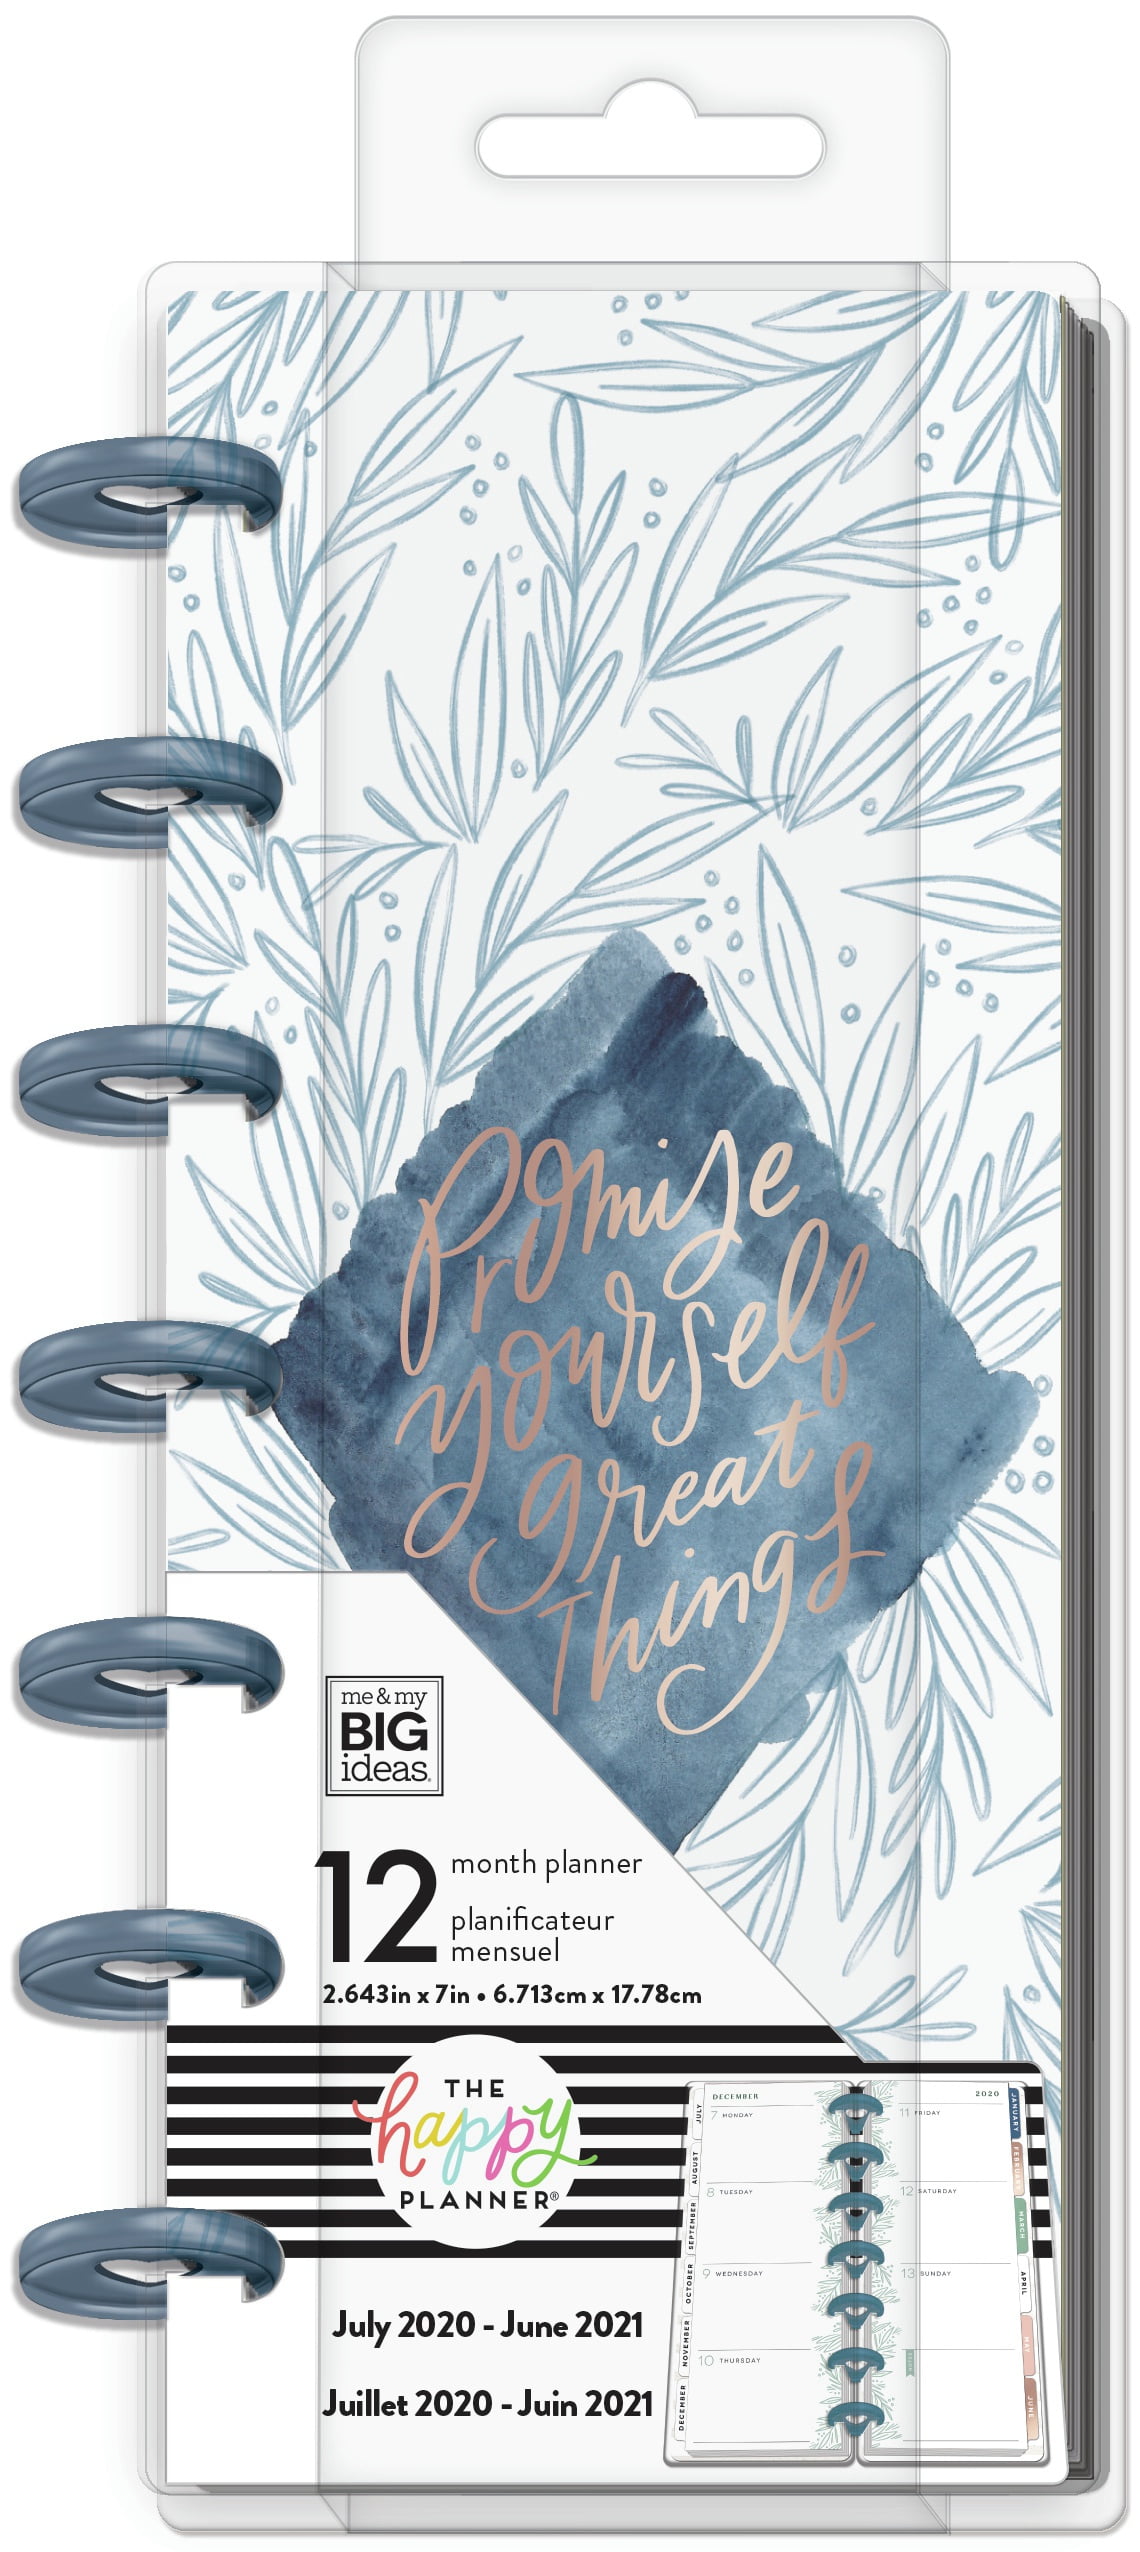 Details about  / Happy PLANNER 12mo MINI PLANNER 2020